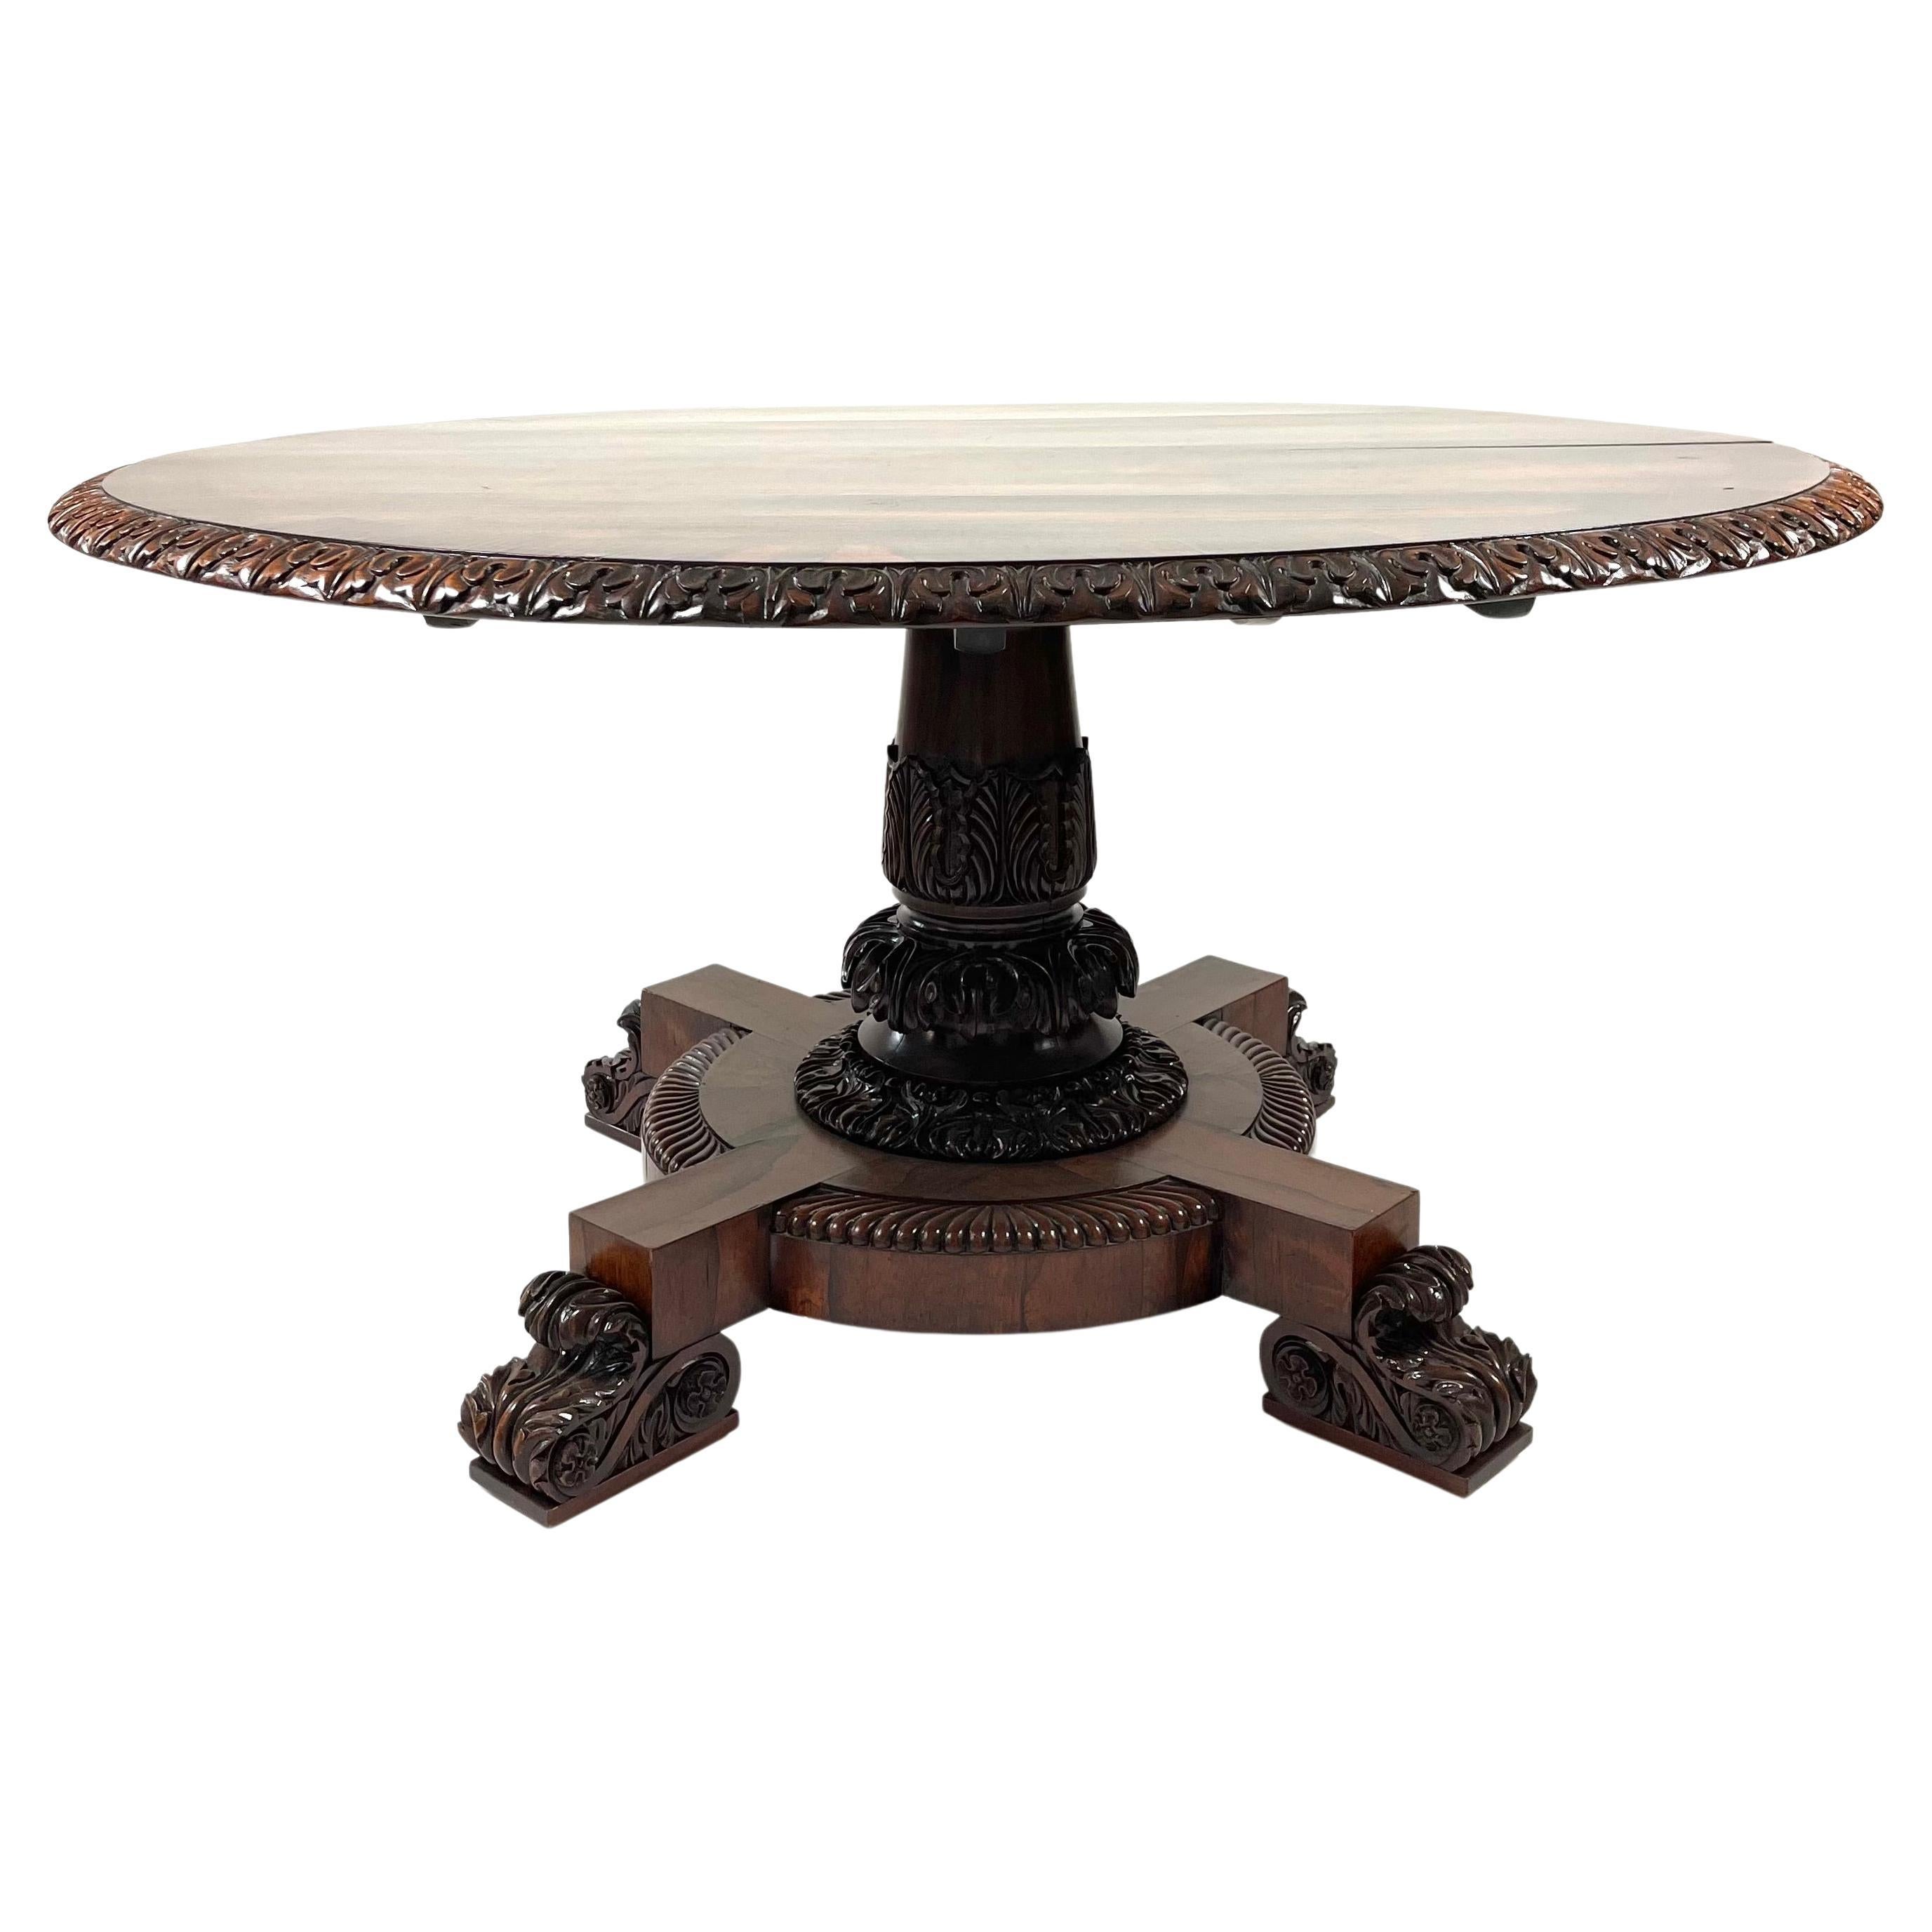 Spectacular 19th Century William IV Rosewood Dining or Center Table